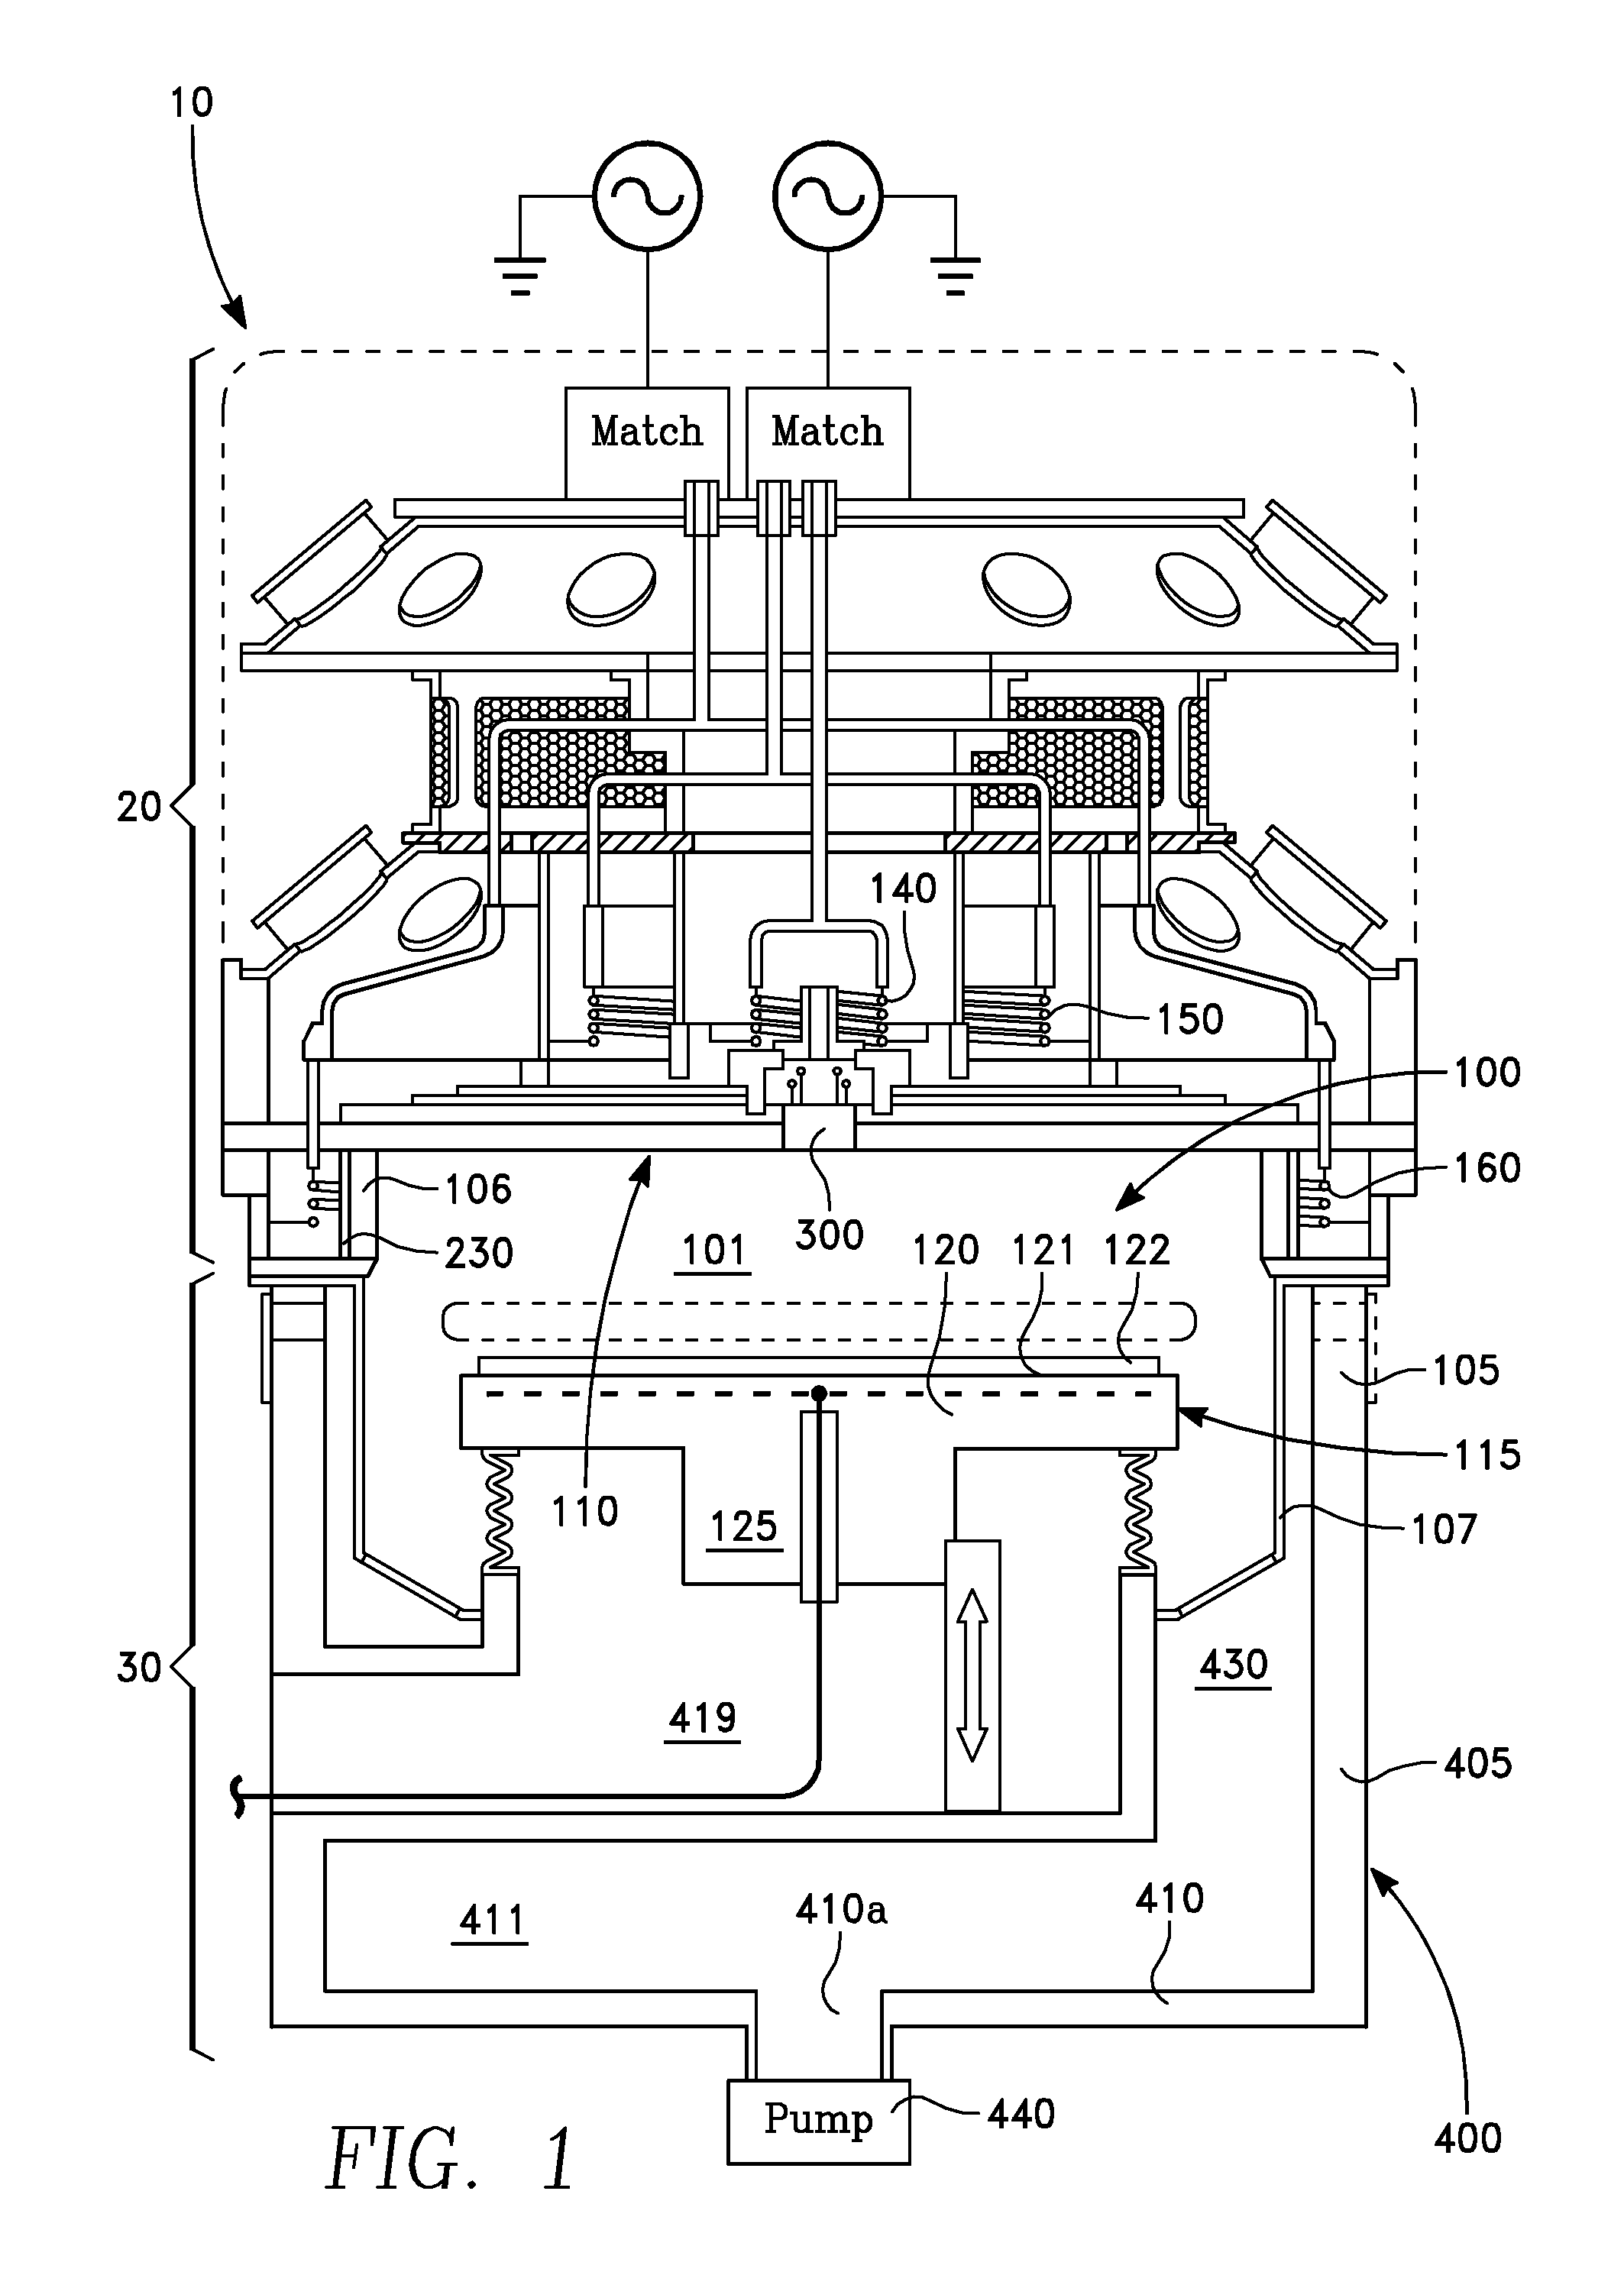 Multiple coil inductively coupled plasma source with offset frequencies and double-walled shielding